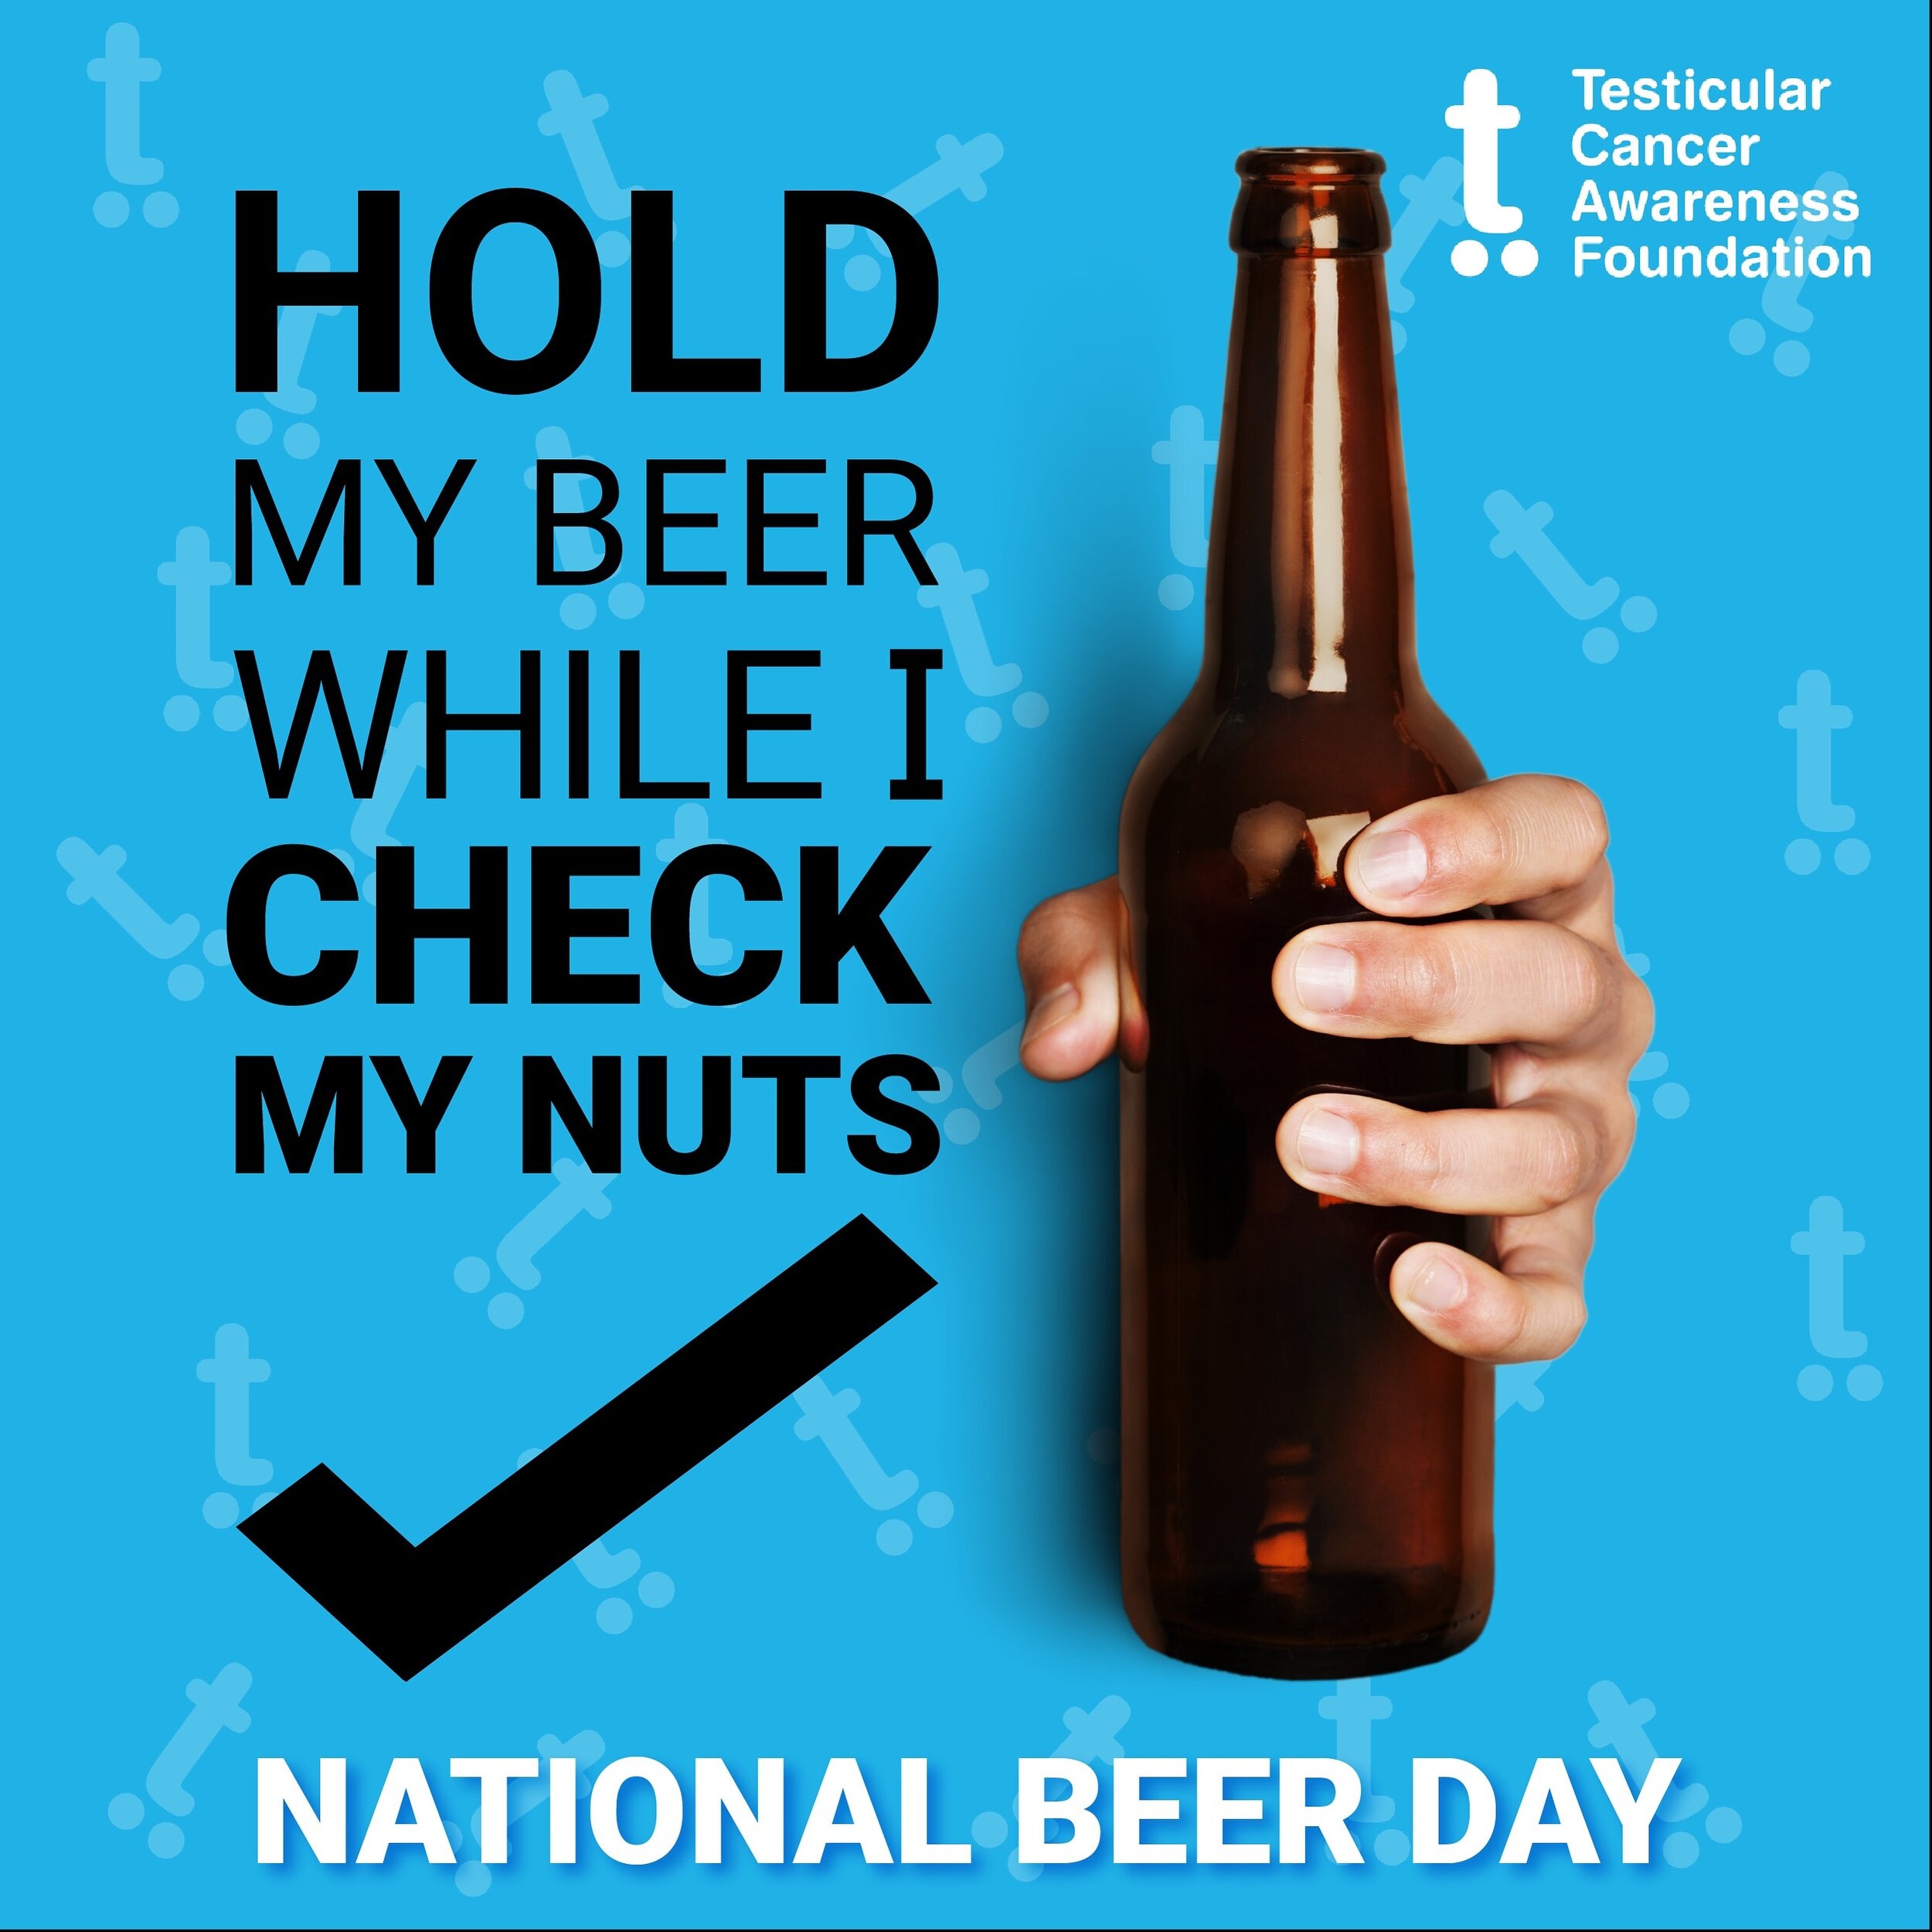 Who knew it was National Beer Day?? But we know it&rsquo;s Testicular Cancer Awareness Month! So check those nuts! 🥜🍺

#testicularcancer 
#beerday
#tcawarenessmonth 
#tcsurvivor 
#menshealth 
#earlydetection 
#cancer
#cancerawareness 
#selfexam